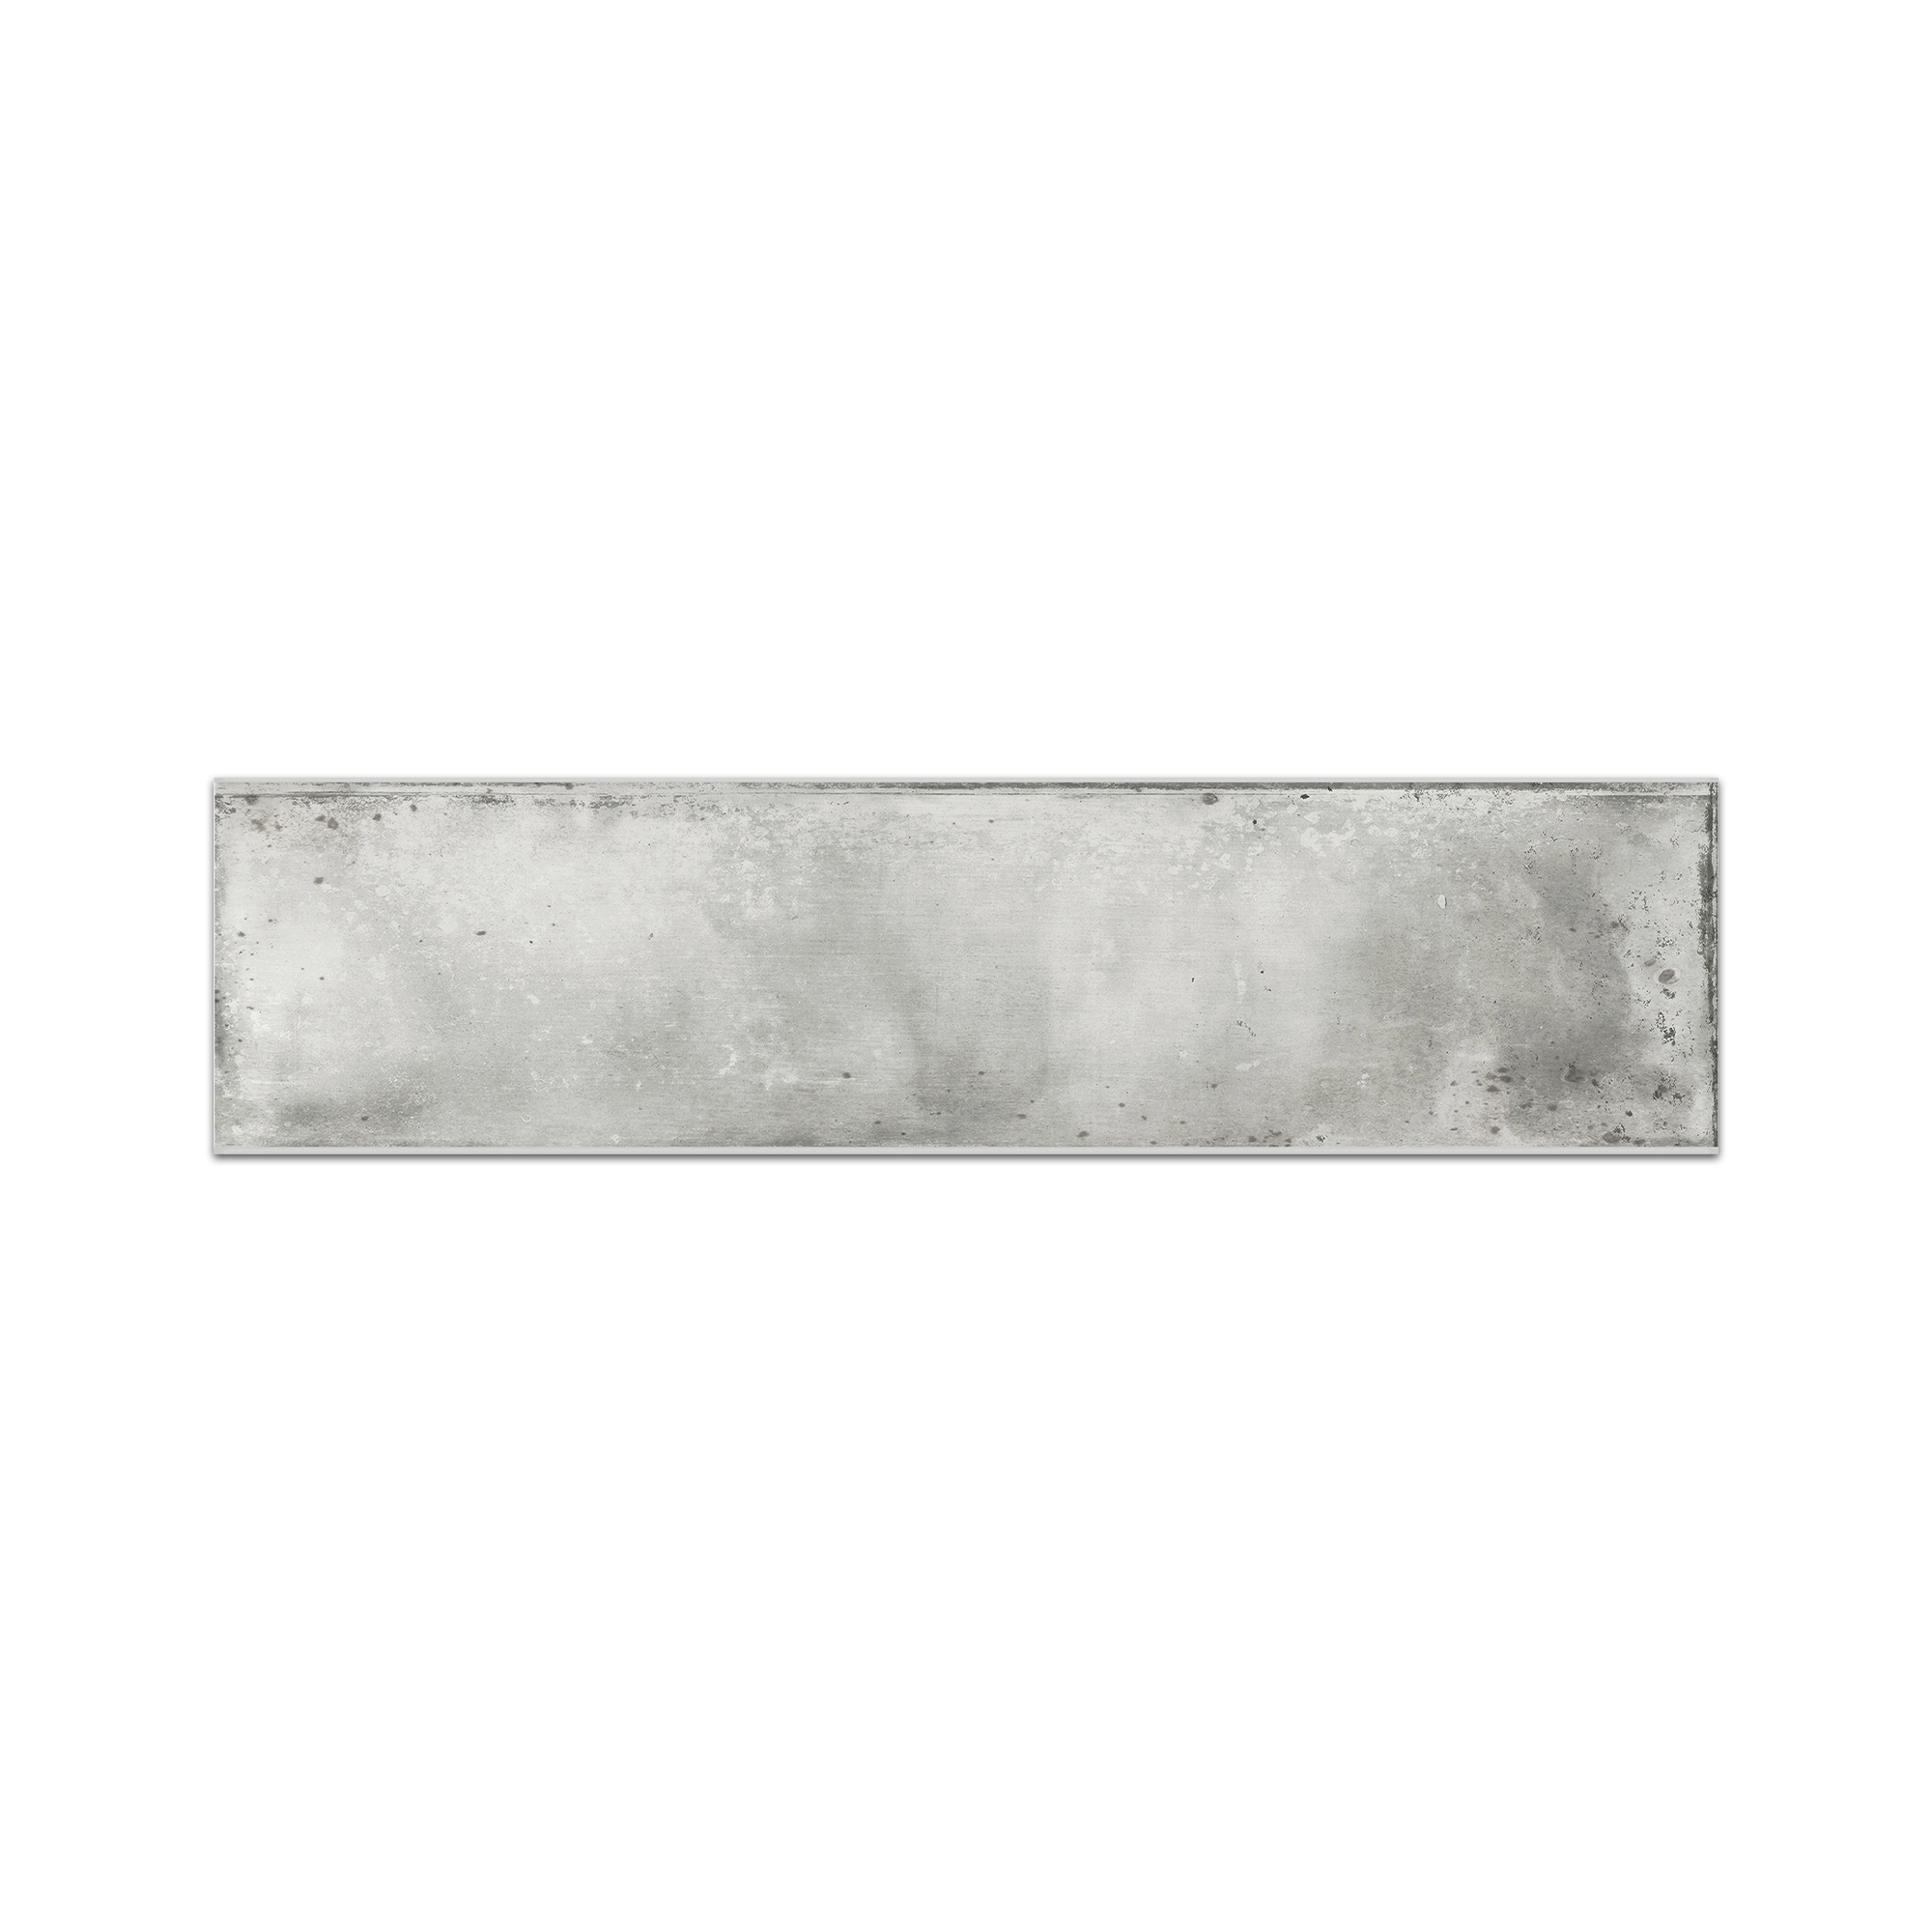 Elon Timeless Grey Porcelain Rectangle Wall Tile 3x12x0.3125 Glossy MP702 Surface Group International Product